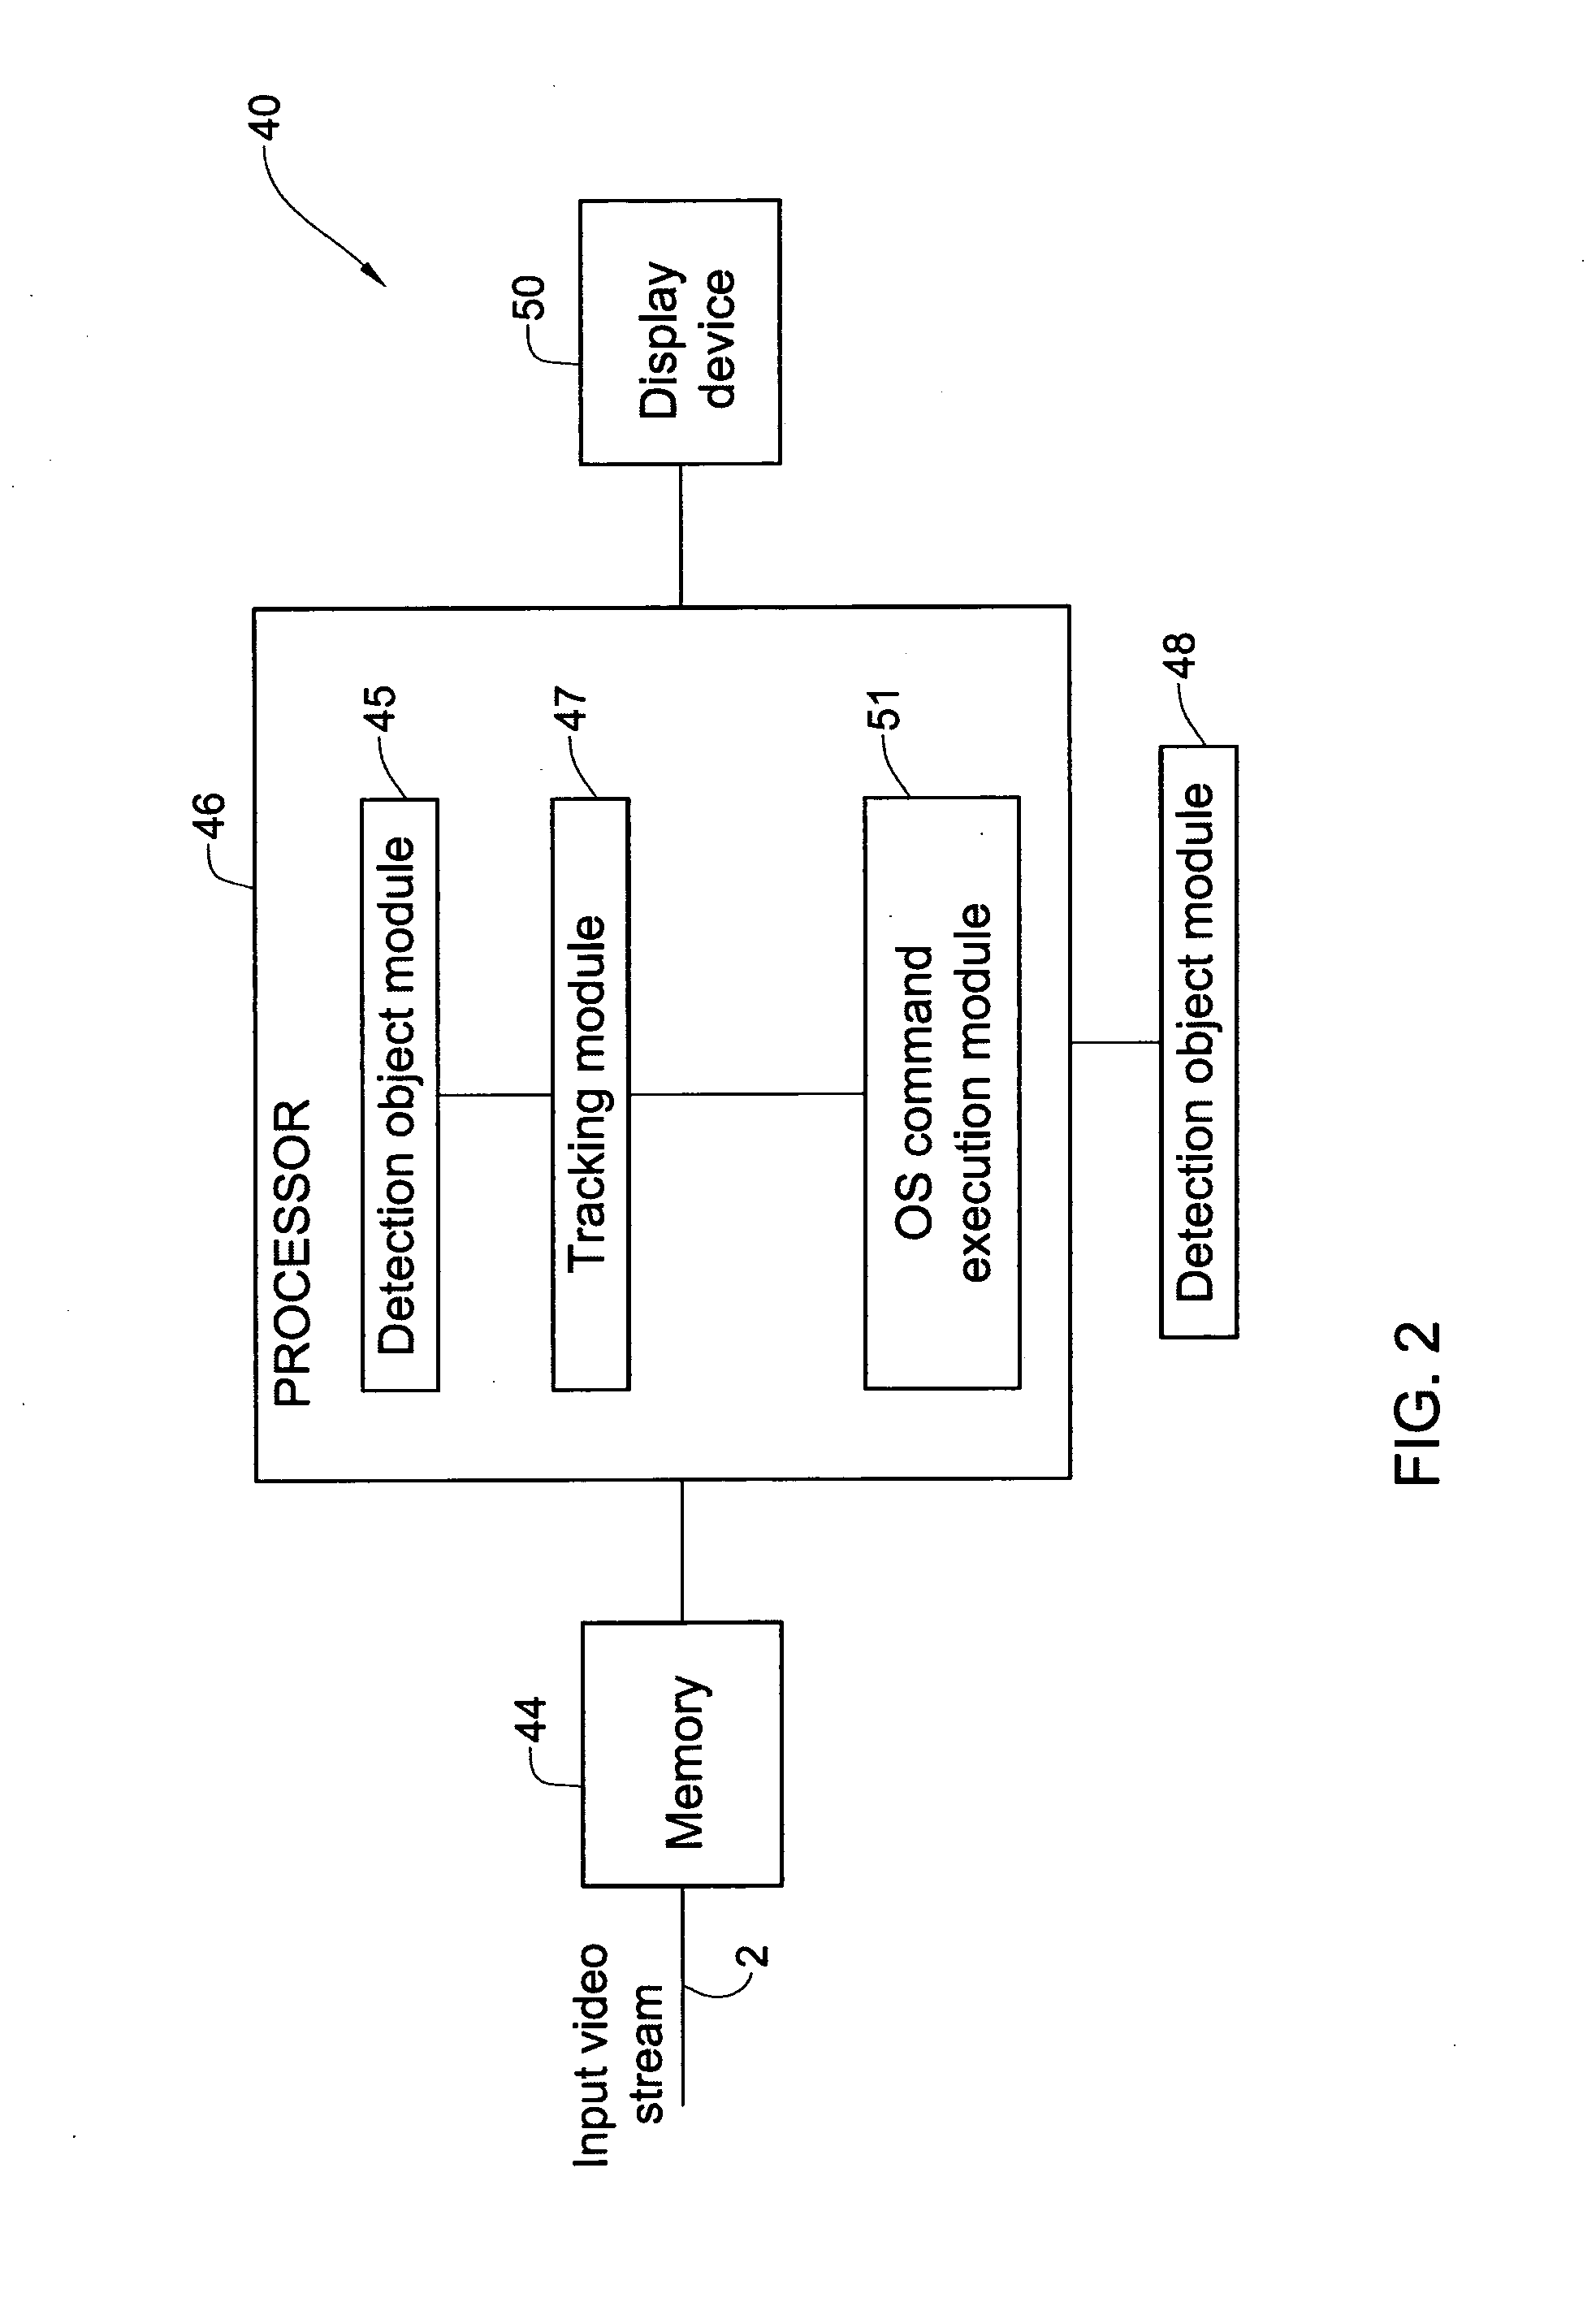 System and method for object recognition and tracking in a video stream